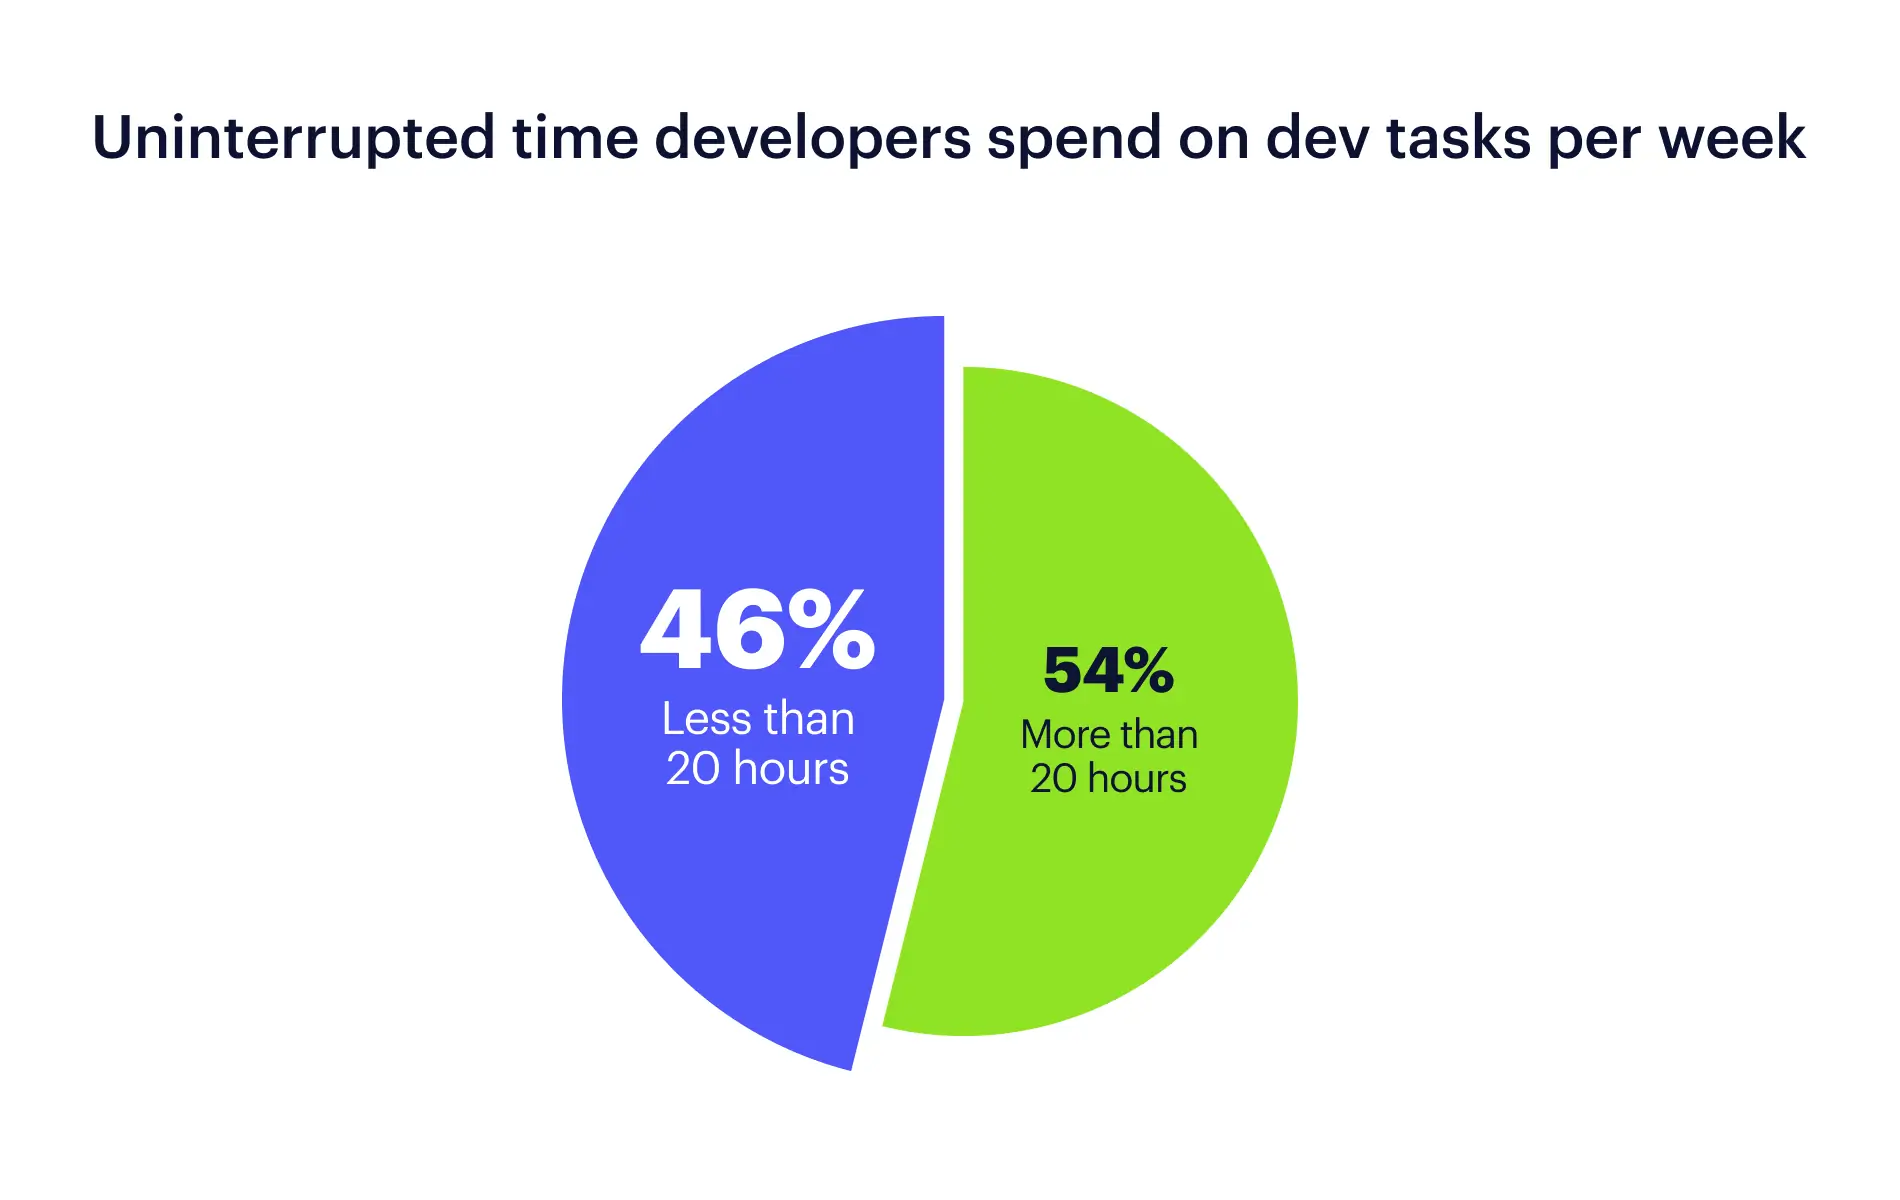 46 percent of developers spend less than 20 hours on dev tasks